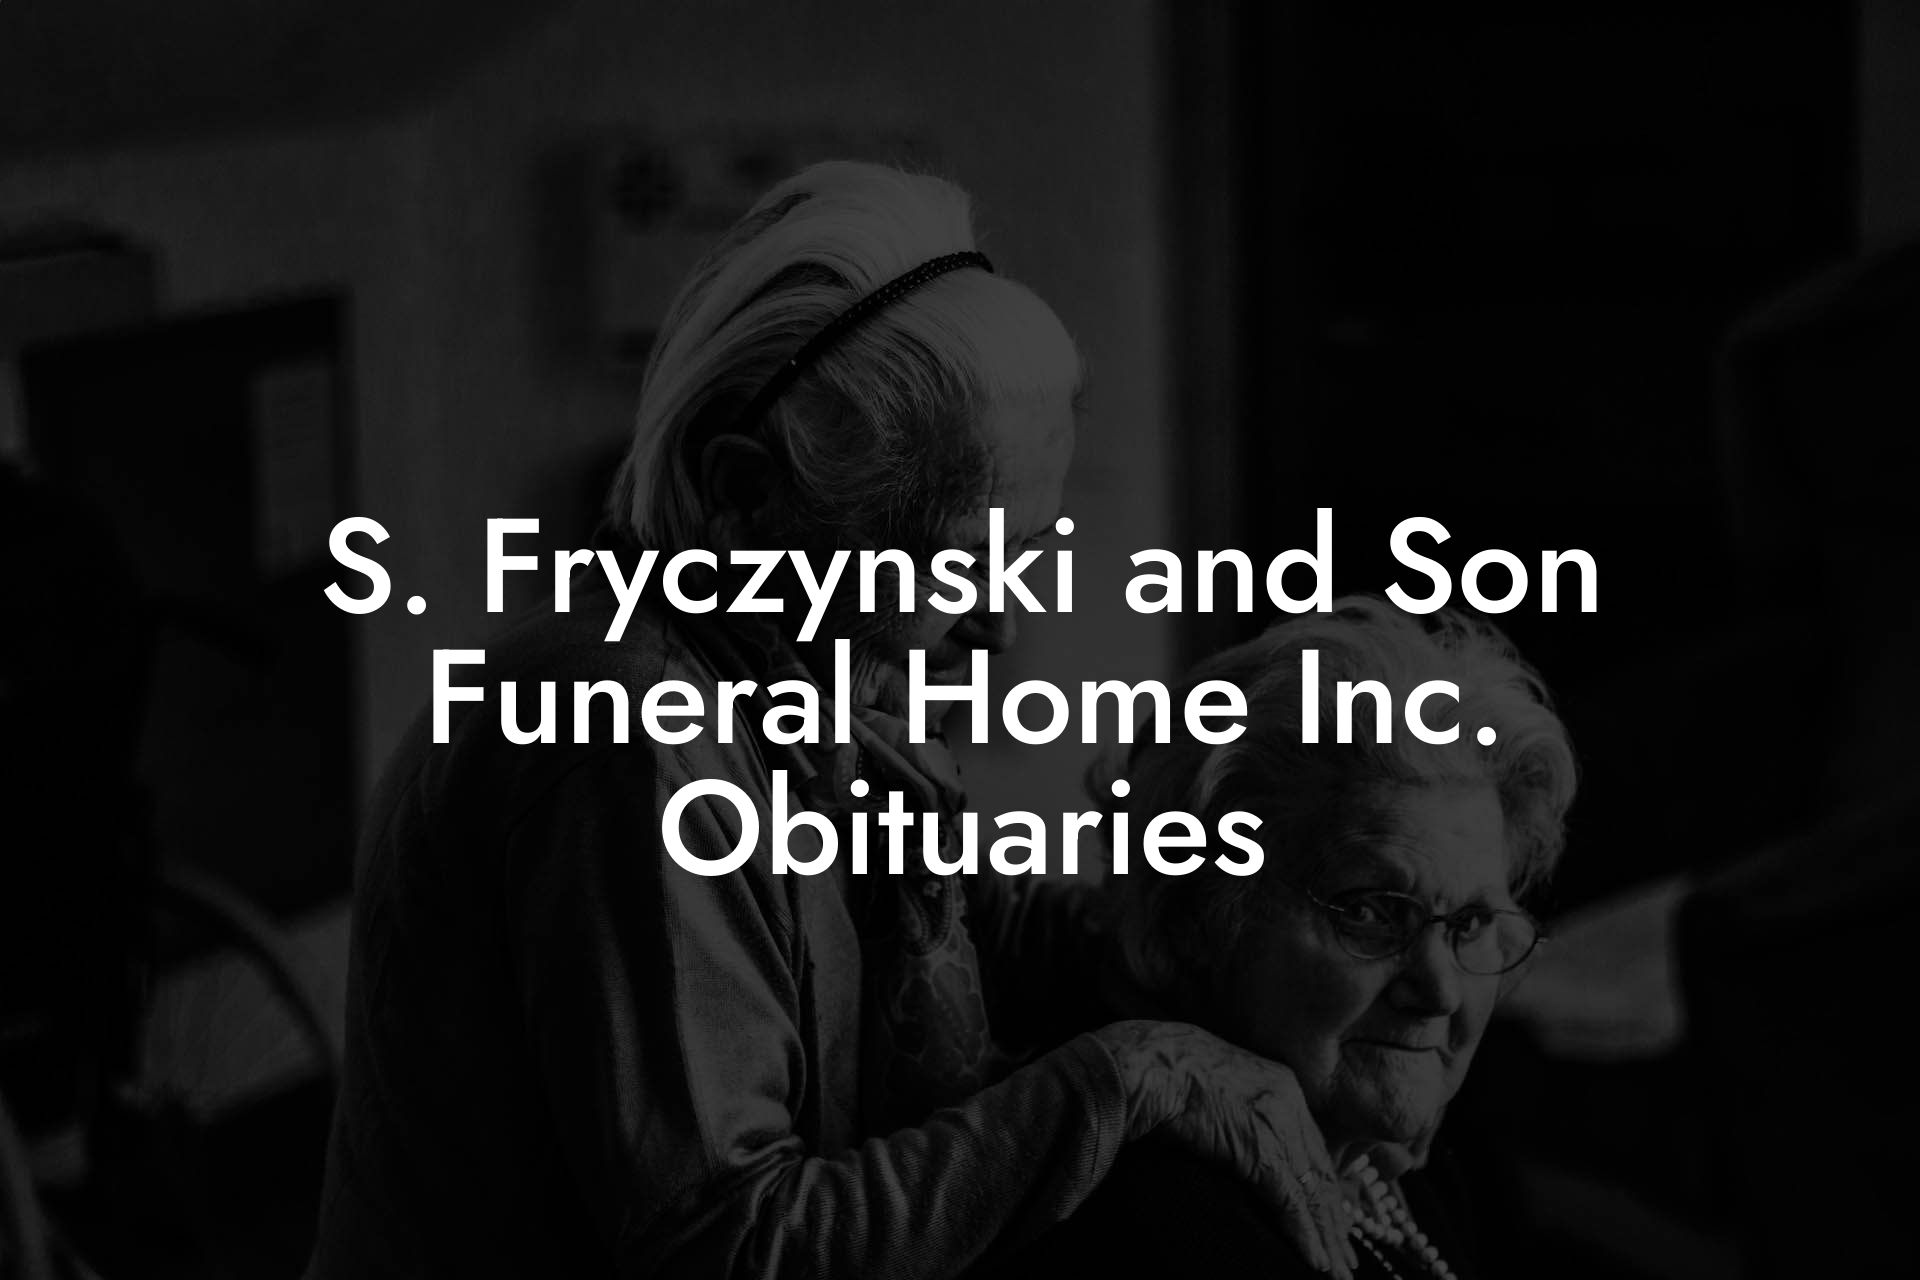 S. Fryczynski and Son Funeral Home Inc. Obituaries